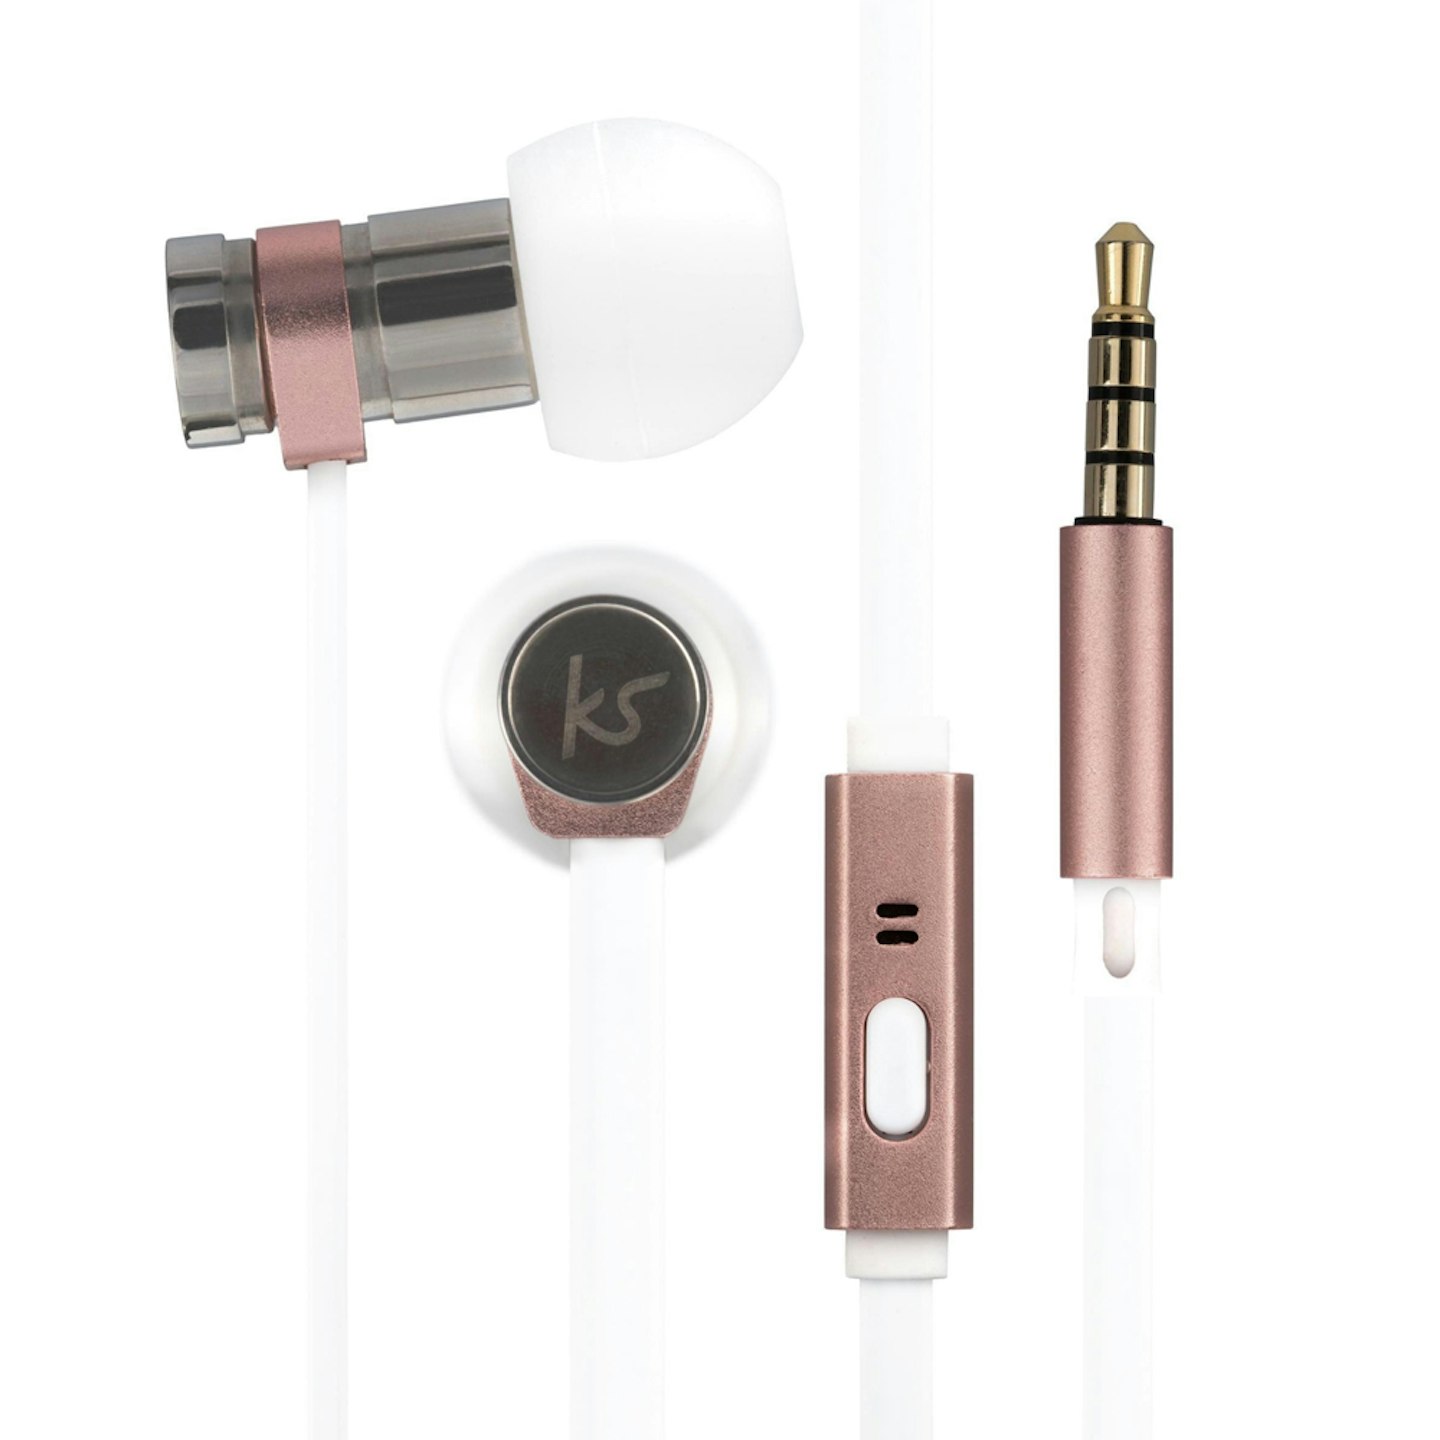 Kitsound Nova Wired Portable Earphones with Built-In Microphone – Rose Gold